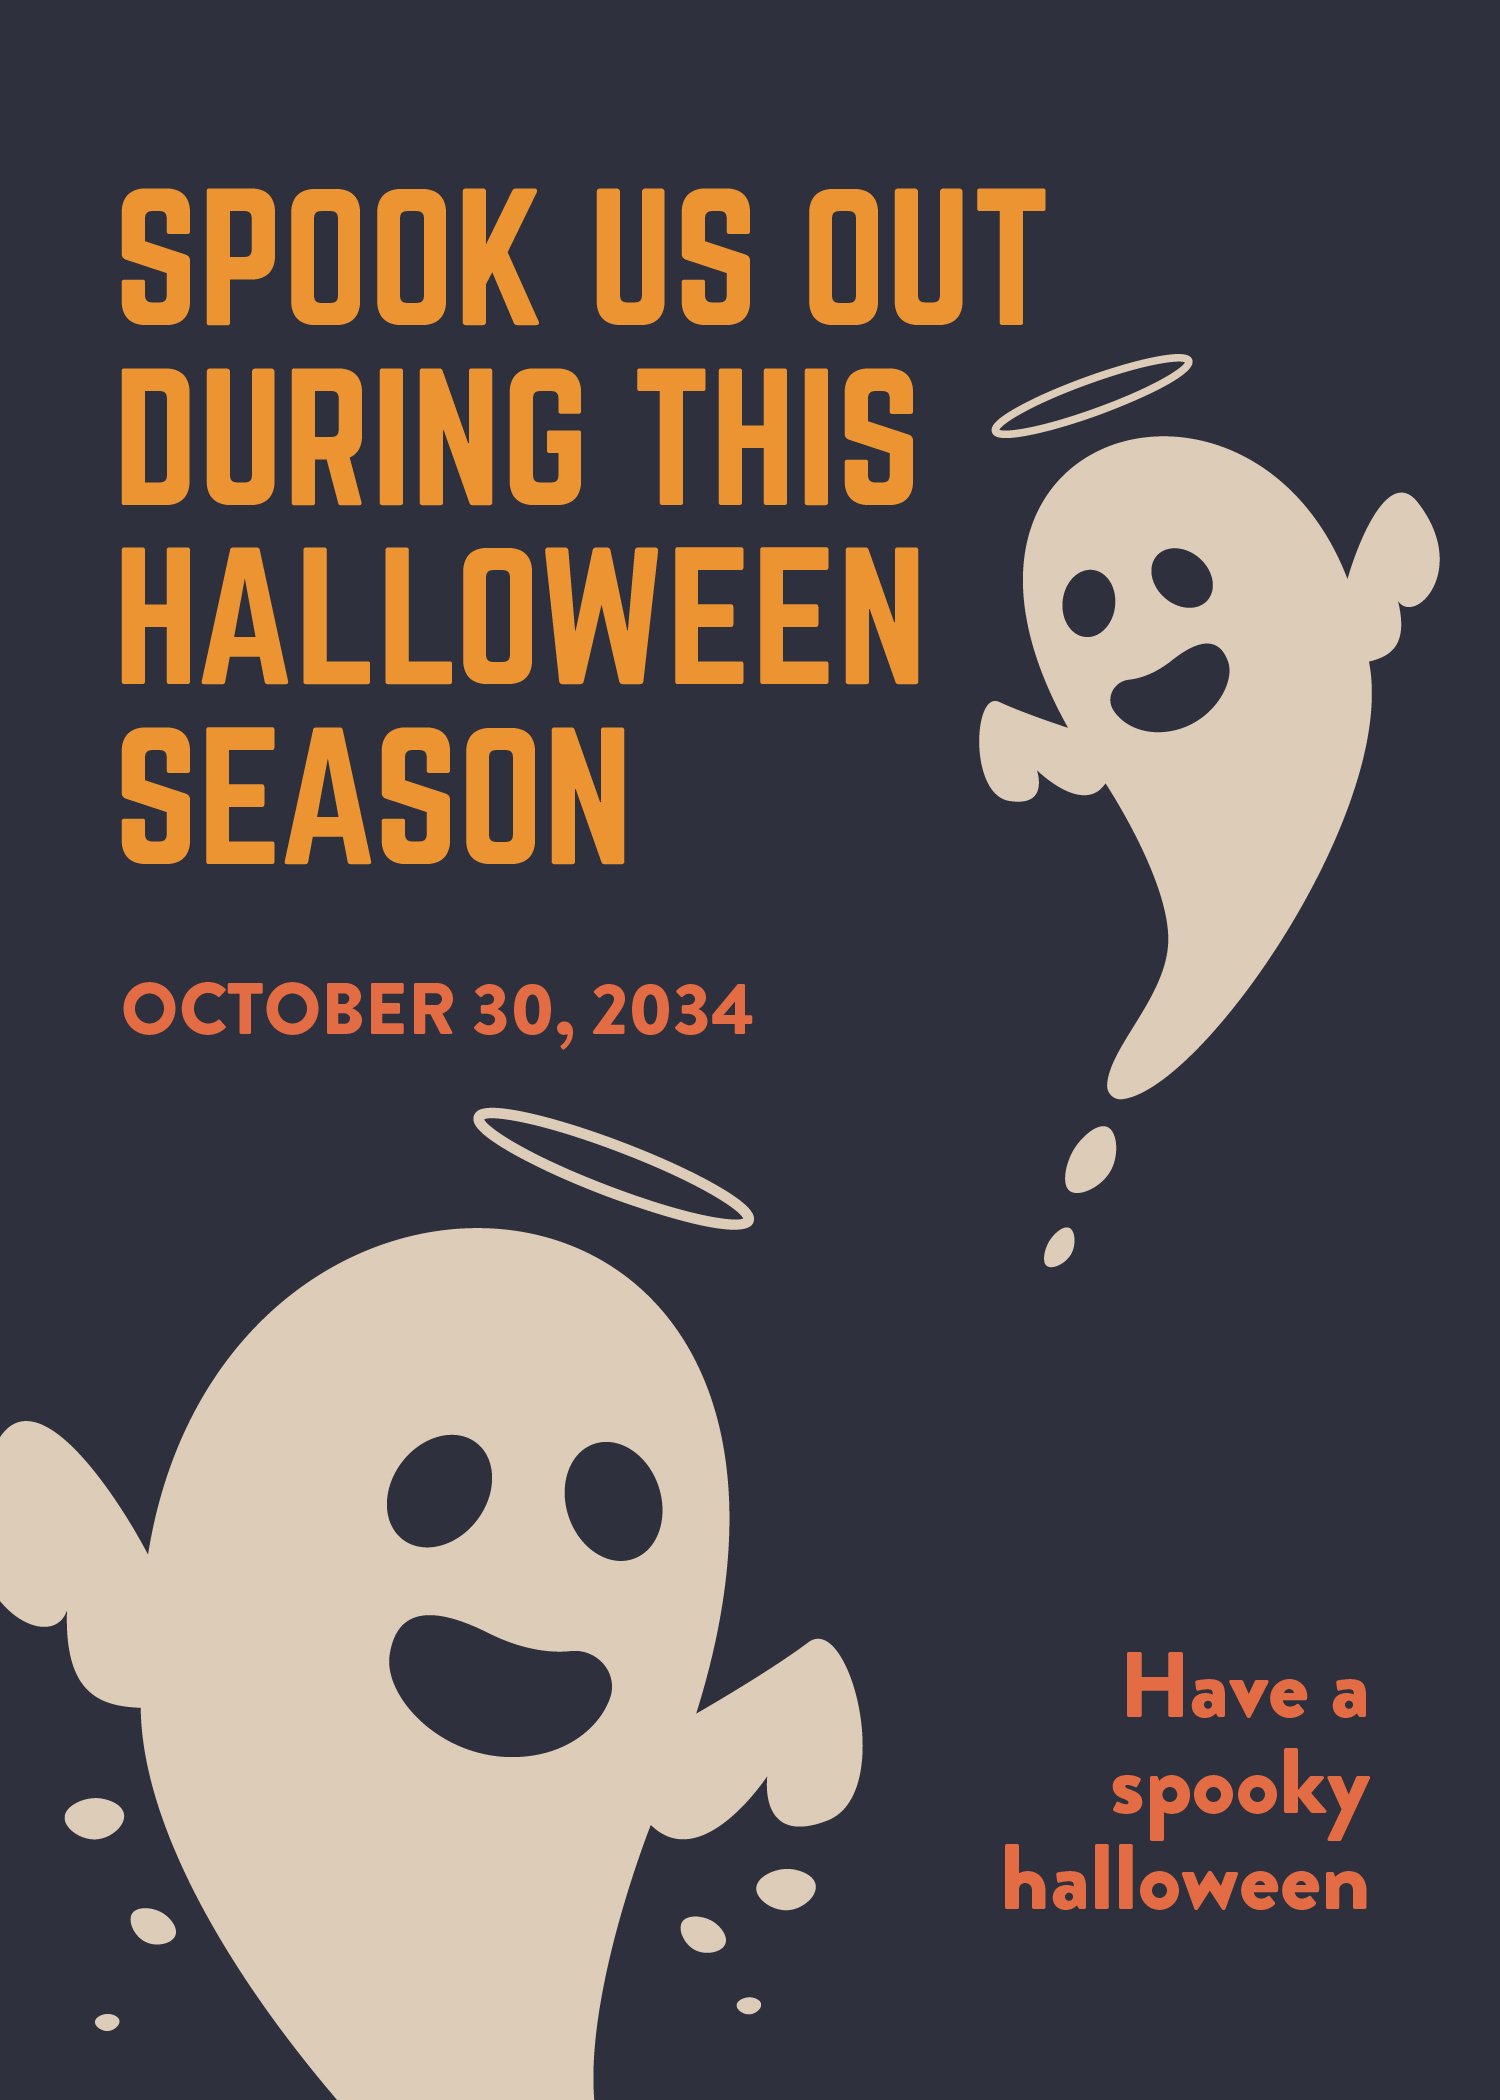 Free Halloween Message in Word, Google Docs, Illustrator, PSD, Apple Pages, Publisher, EPS, SVG, JPG, PNG